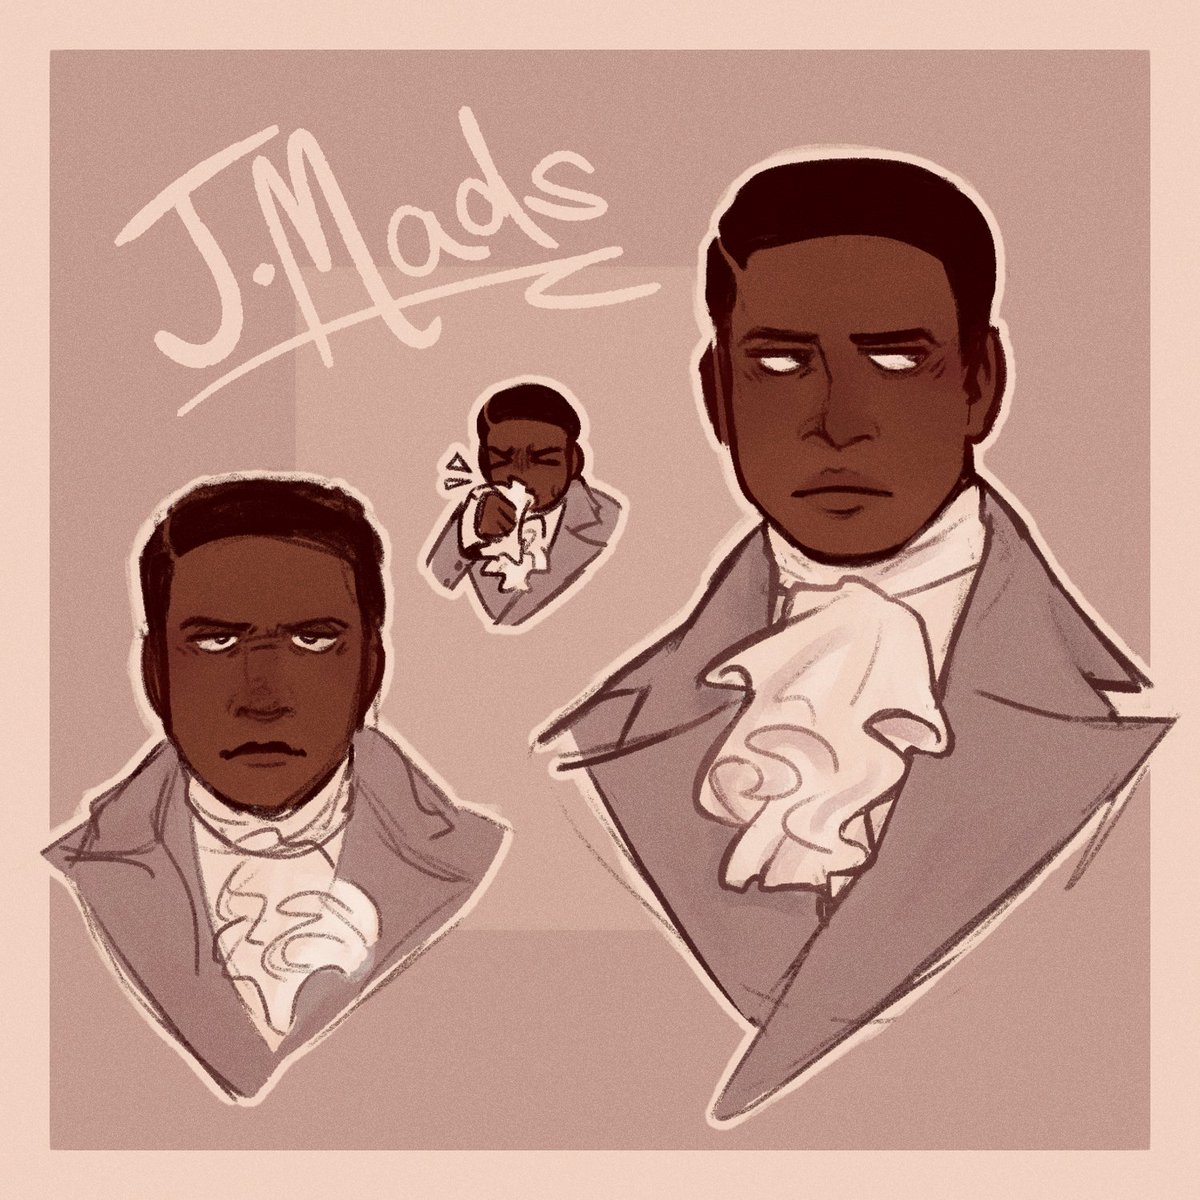 'My friend James Madison, red in the face'
#hamilton #hamiltonmusical